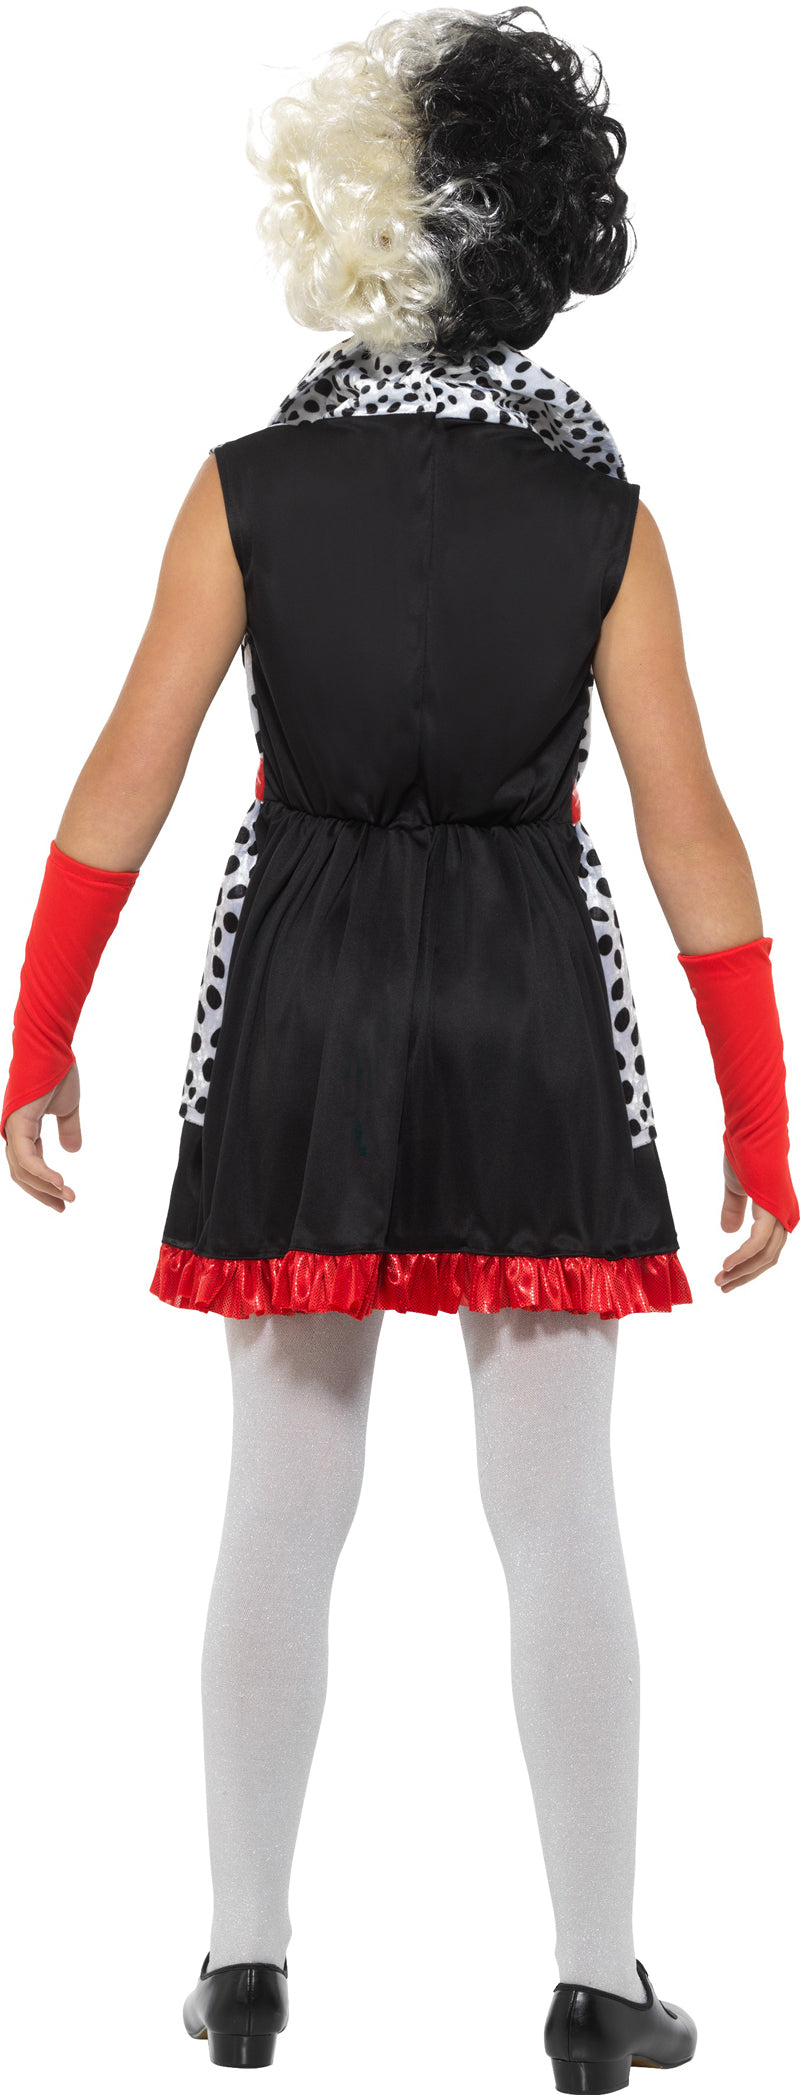 Wickedly Chic Evil Little Madame Costume for Girls